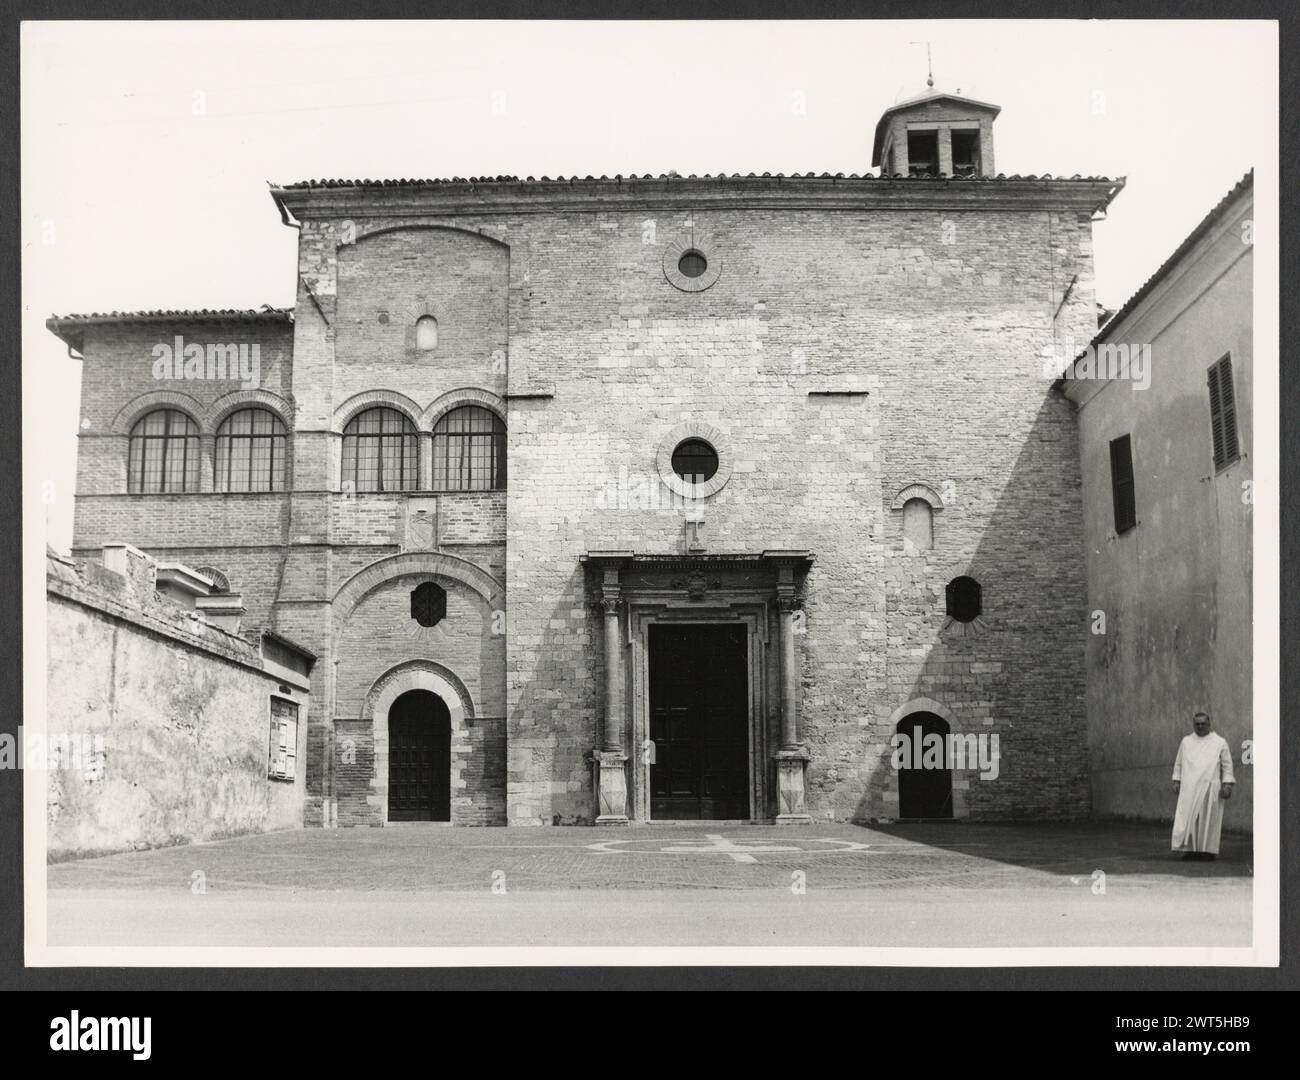 Umbria Perugia Foligno S. Maria in Campis. Hutzel, Max 1960-1990 Post-medieval: 15th century architecture (begun 1452) German-born photographer and scholar Max Hutzel (1911-1988) photographed in Italy from the early 1960s until his death. The result of this project, referred to by Hutzel as Foto Arte Minore, is thorough documentation of art historical development in Italy up to the 18th century, including objects of the Etruscans and the Romans, as well as early Medieval, Romanesque, Gothic, Renaissance and Baroque monuments. Images are organized by geographic region in Italy, then by province Stock Photo